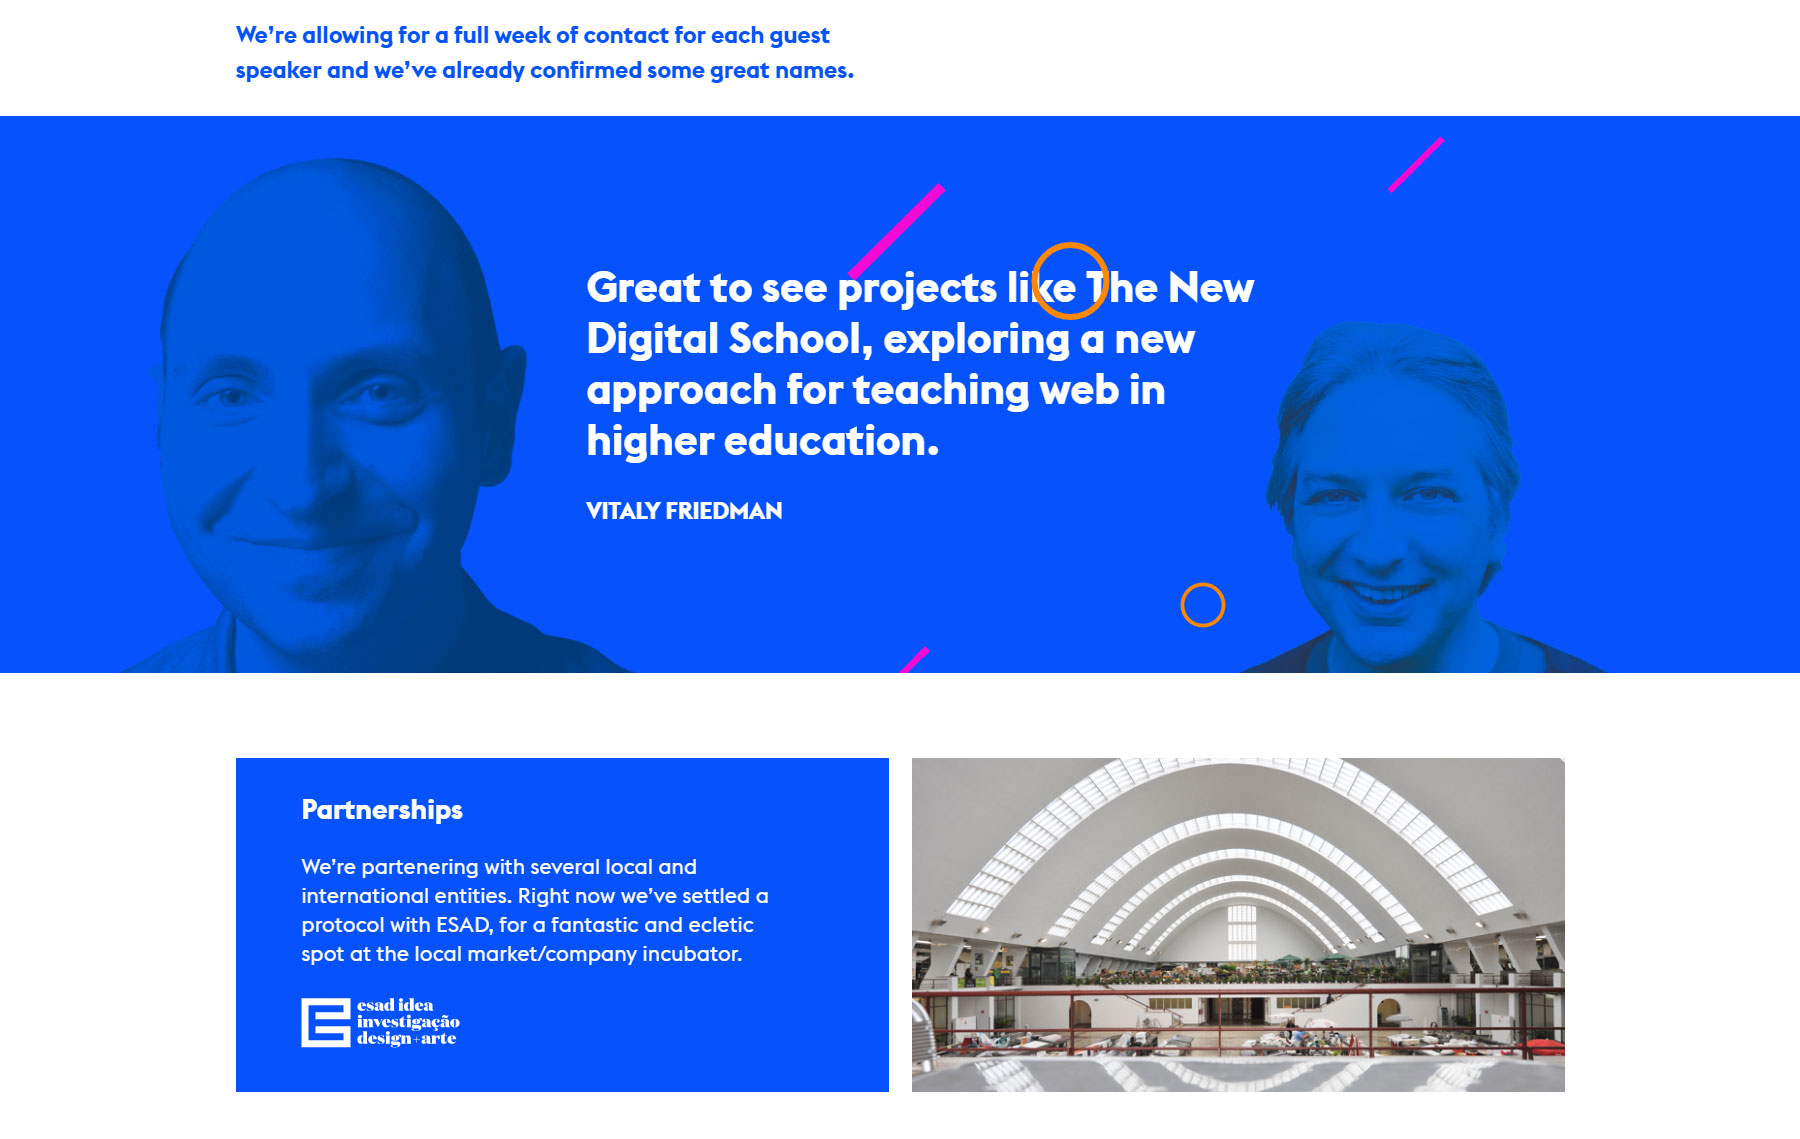 The New Digital School - Website of the Day